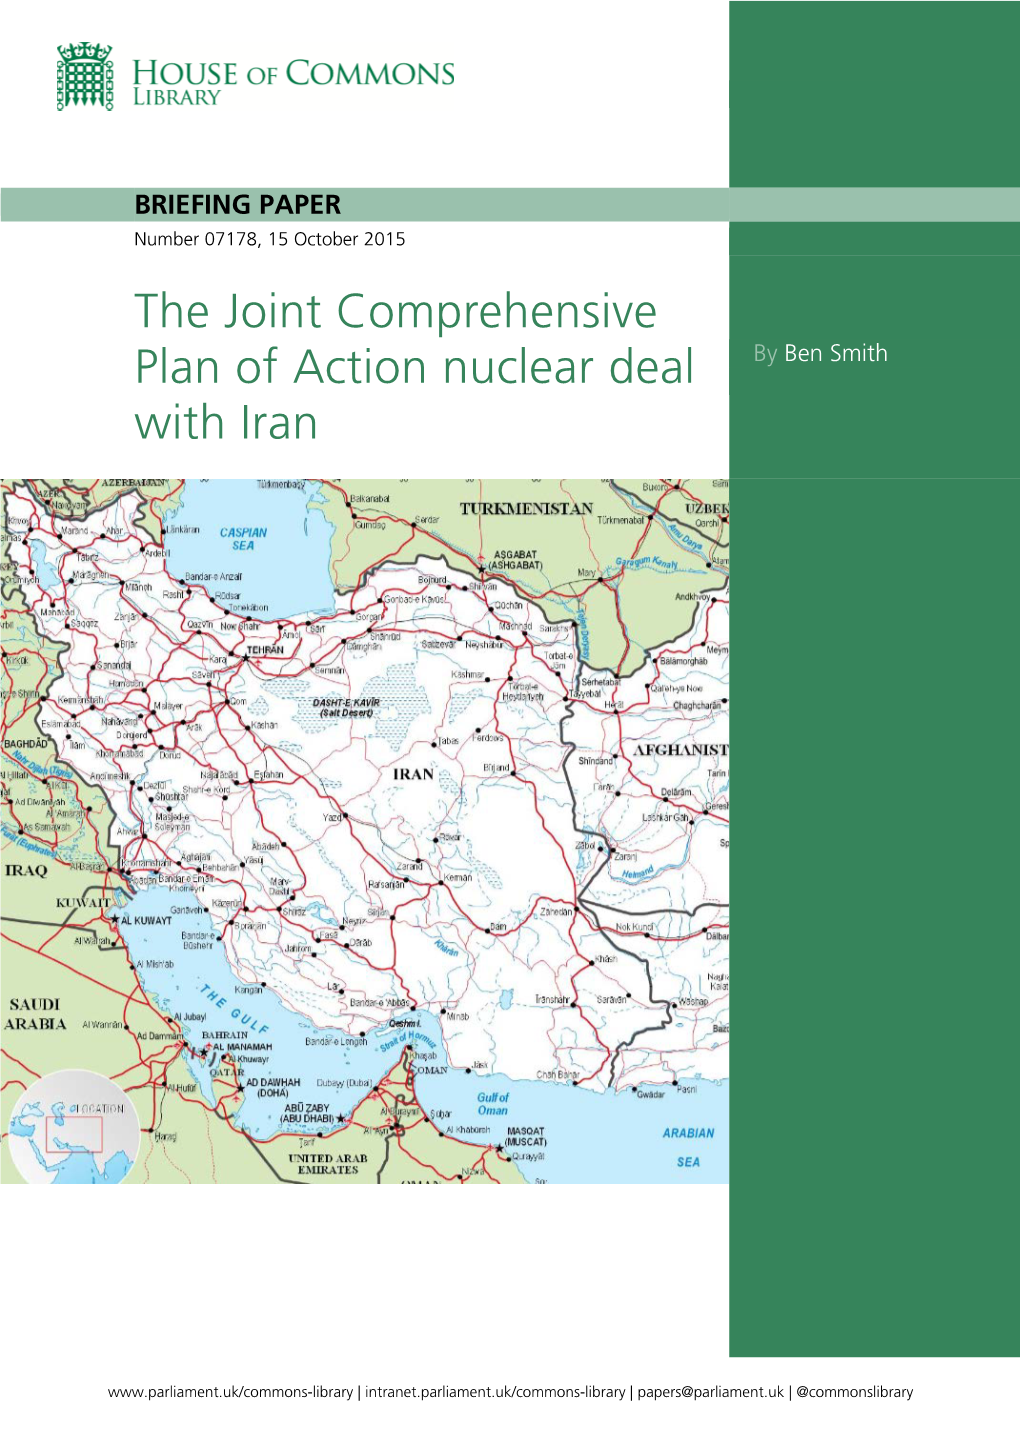 The Joint Comprehensive Plan of Action Nuclear Deal with Iran